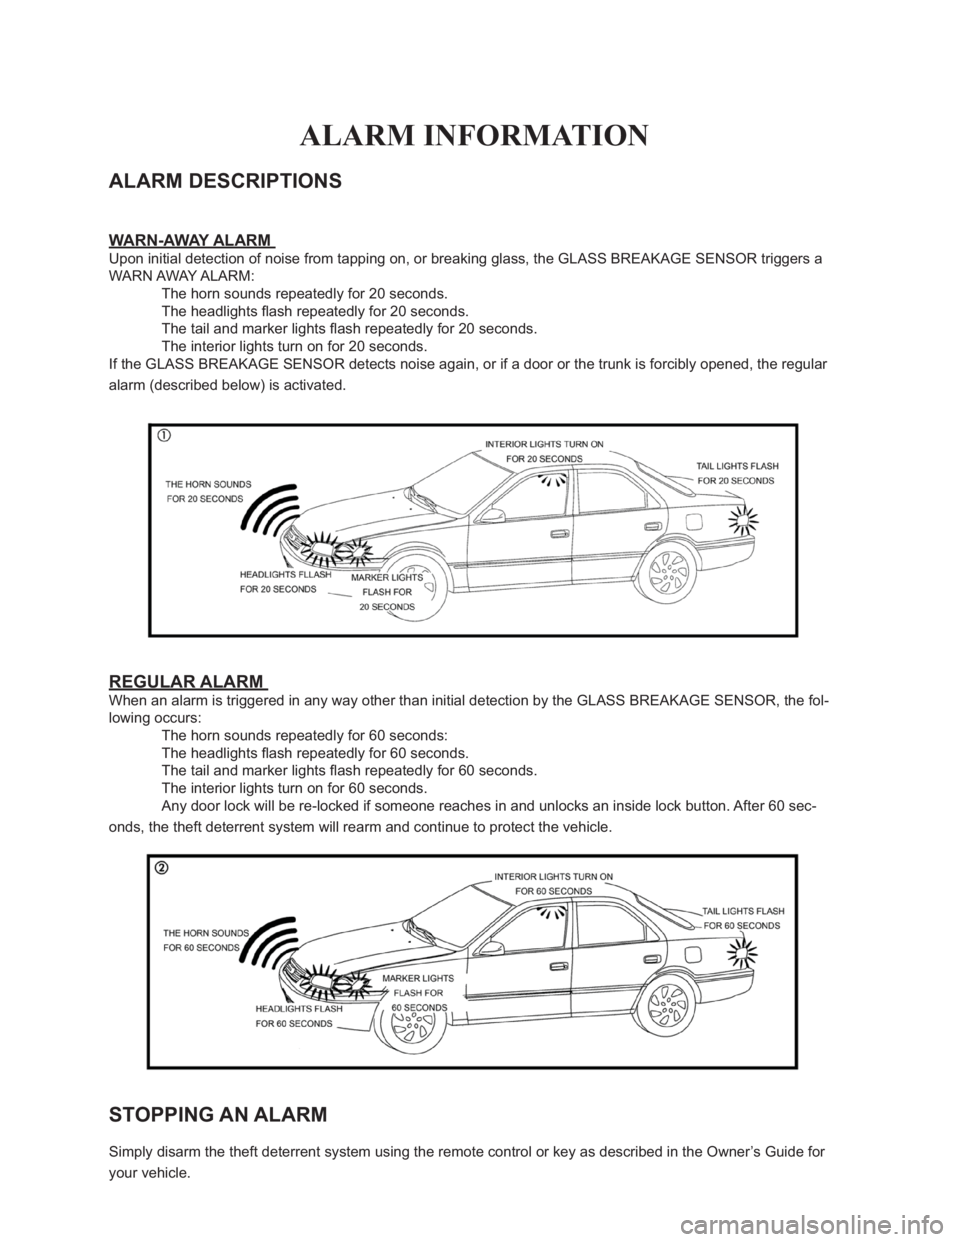 TOYOTA SOLARA 2006  Accessories, Audio & Navigation (in English) 
ALARM INFORMATION
ALARM DESCRIPTIONS 
WARN-AWAY ALARM 
Upon initial detection of noise from tapping on, or breaking glass, the GLASS BREAKAGE SENSOR triggers a 
WARN AWAY ALARM: 
� �7�K�H��K�R�U�Q�